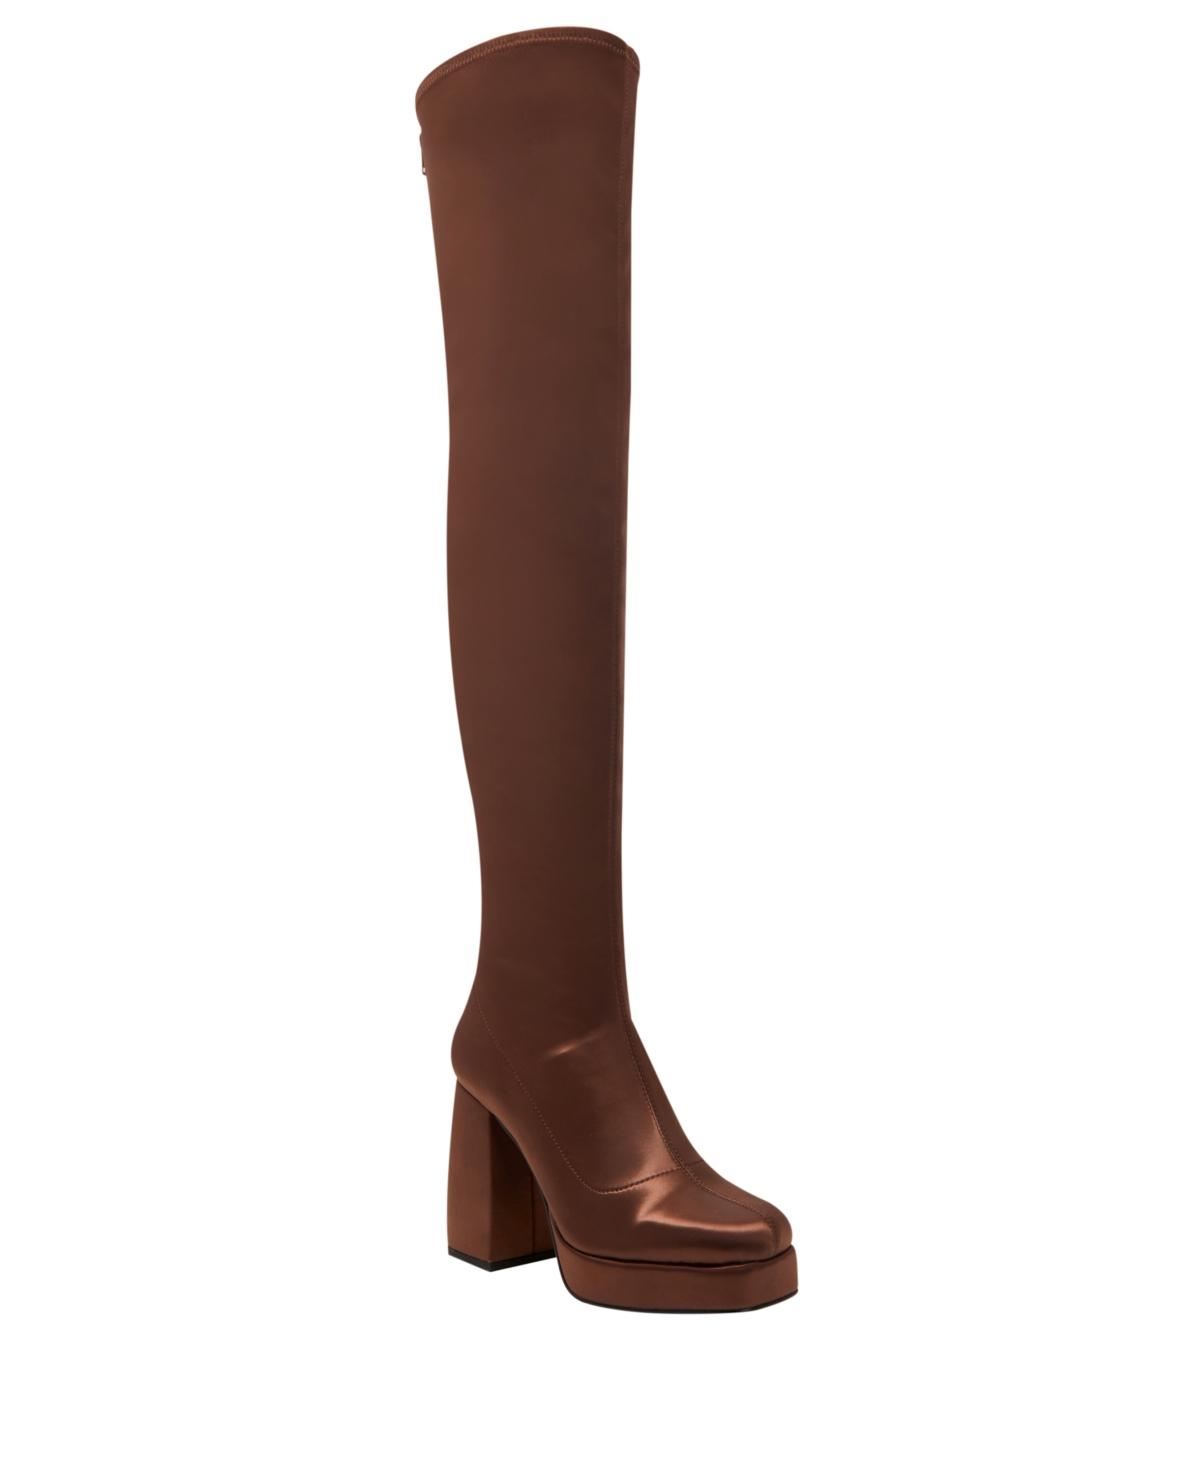 Women's The Uplift Over-The-Knee Boots - Chocolate